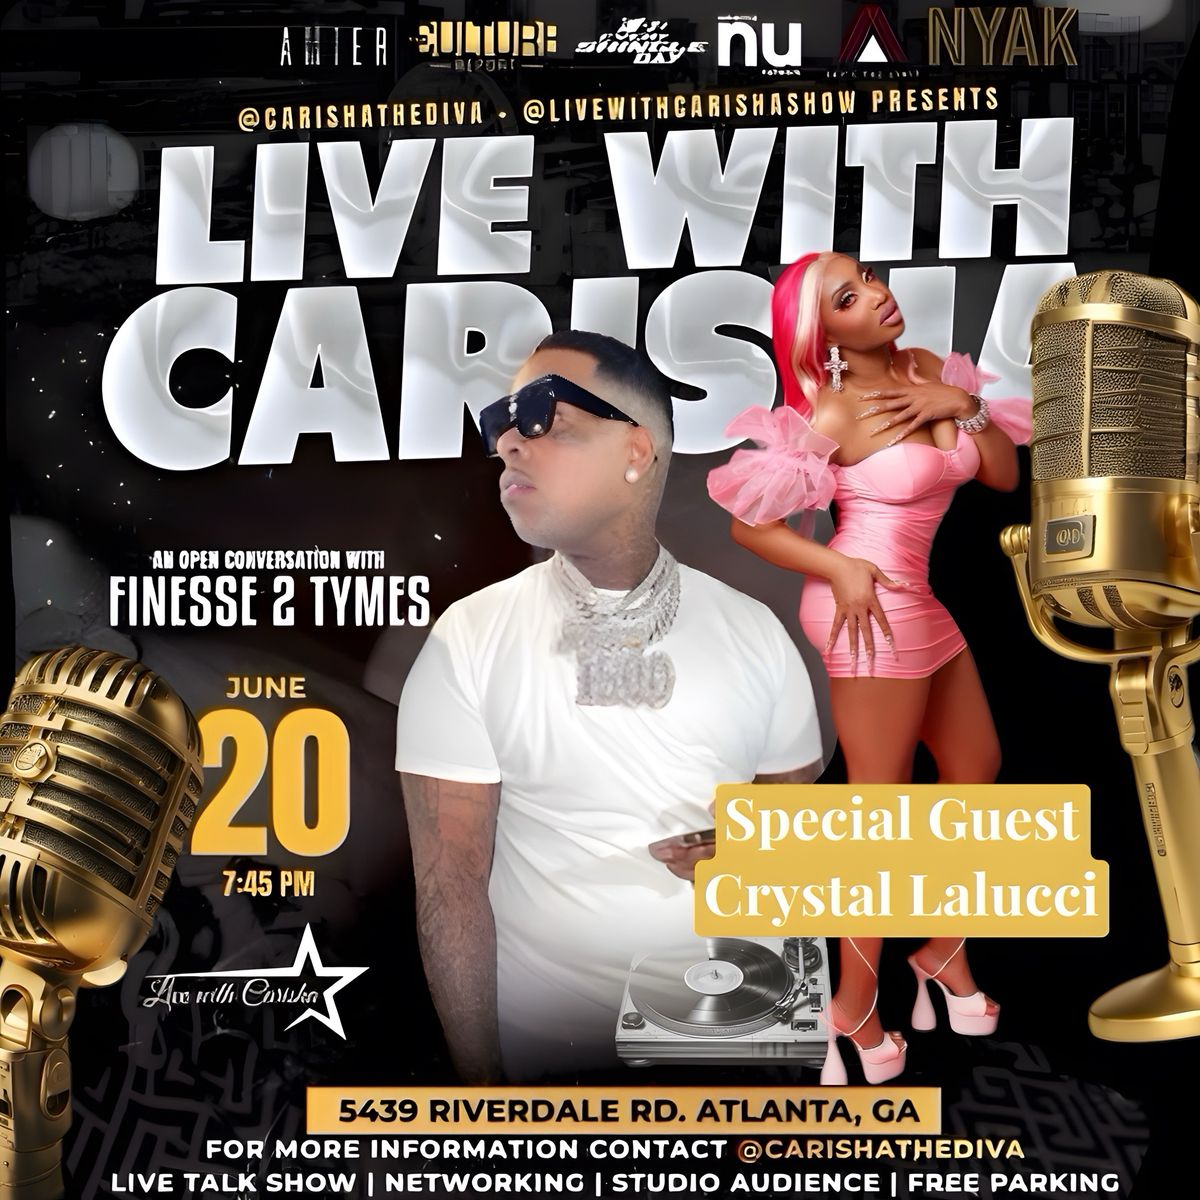 Live With Carisha Starring Finesse 2 Tymes Thursday June 20th